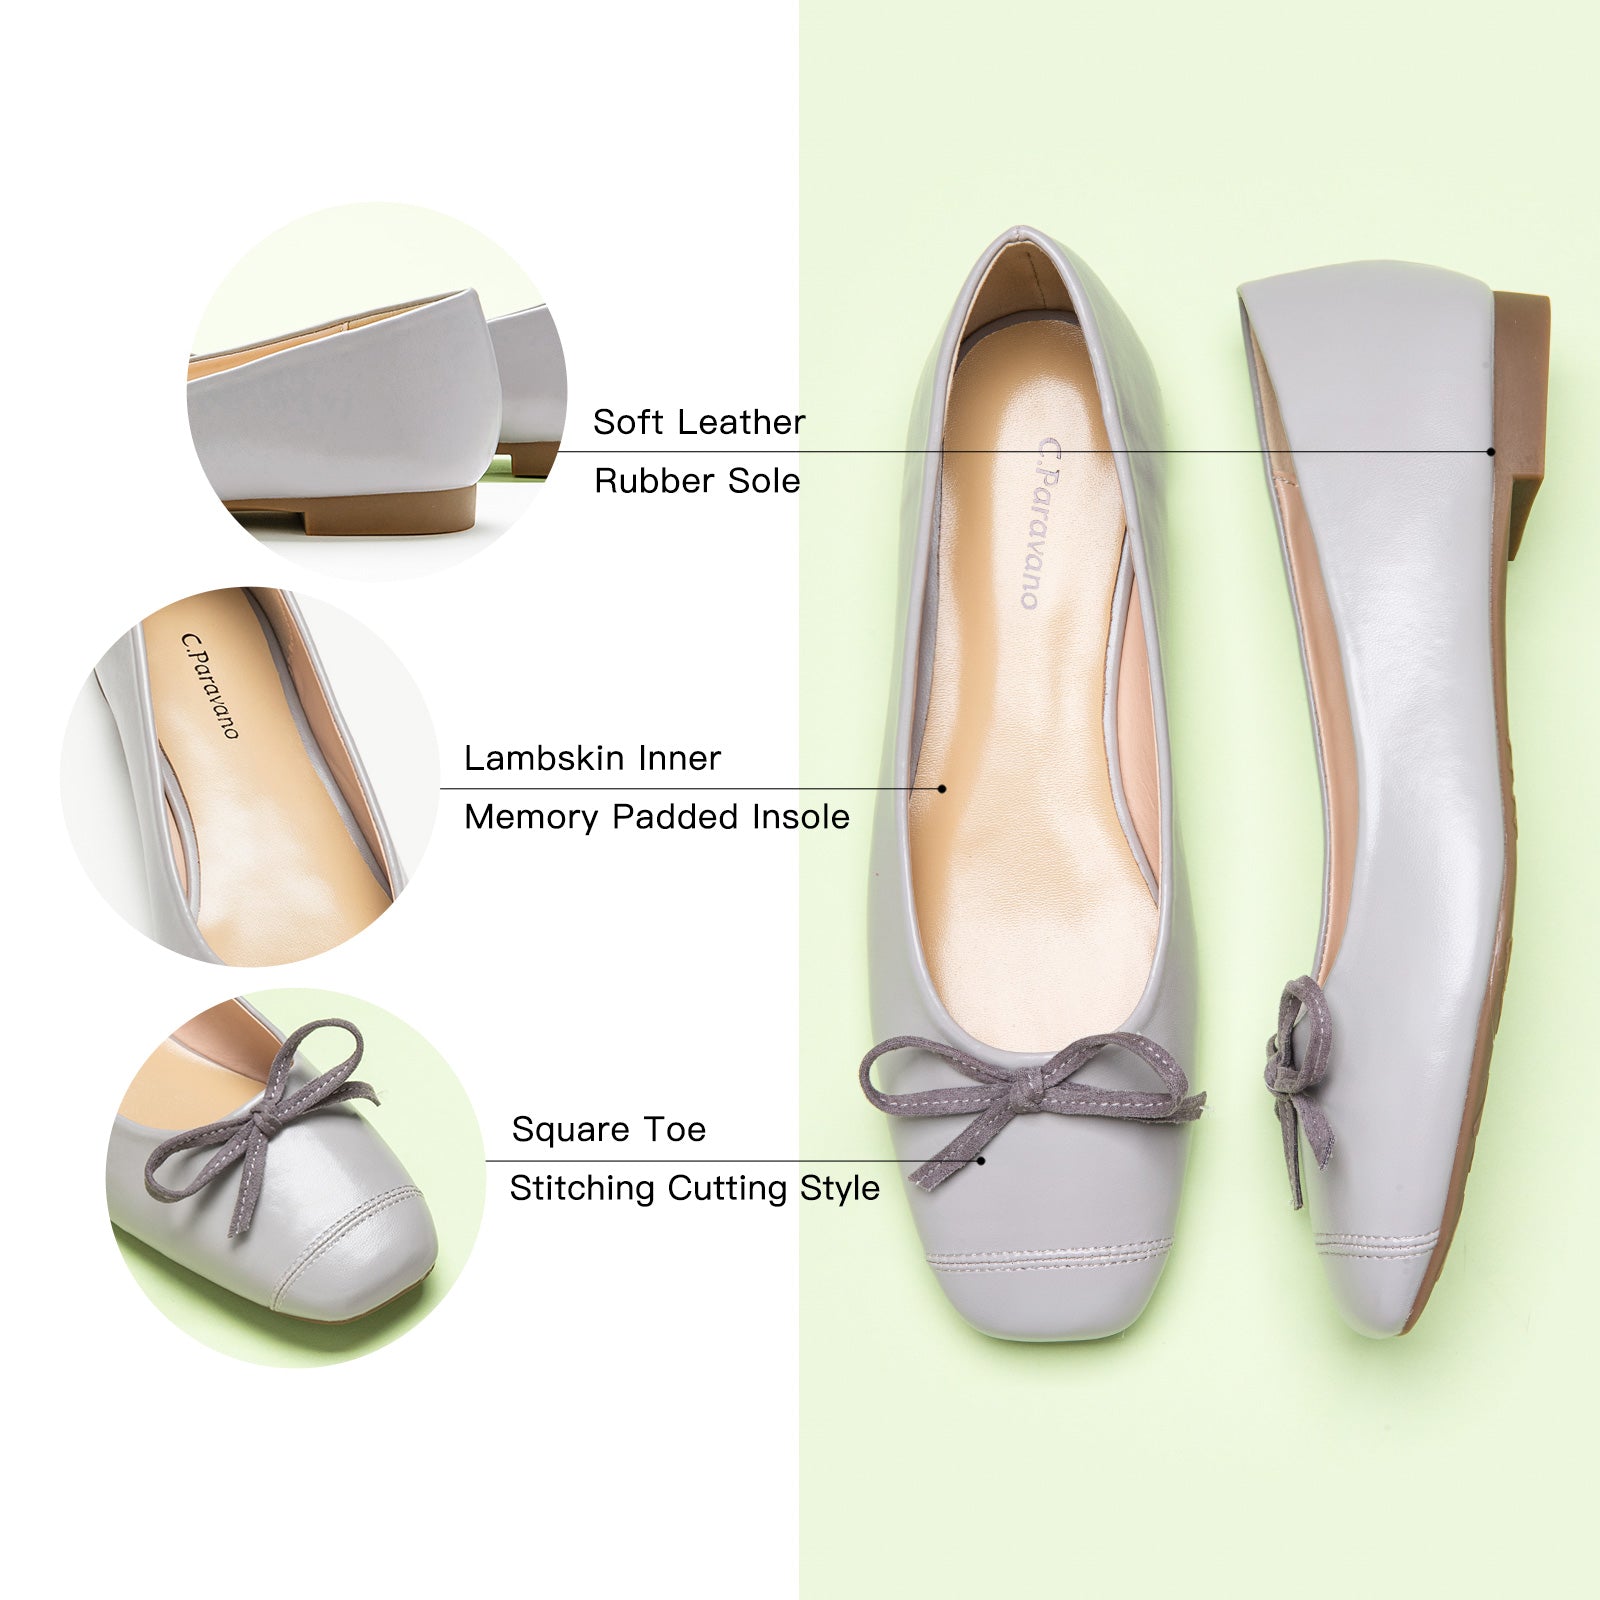  Grey Toe Bowknot Ballet Flats in Suede, perfect for a confident and fashionable look in any urban setting